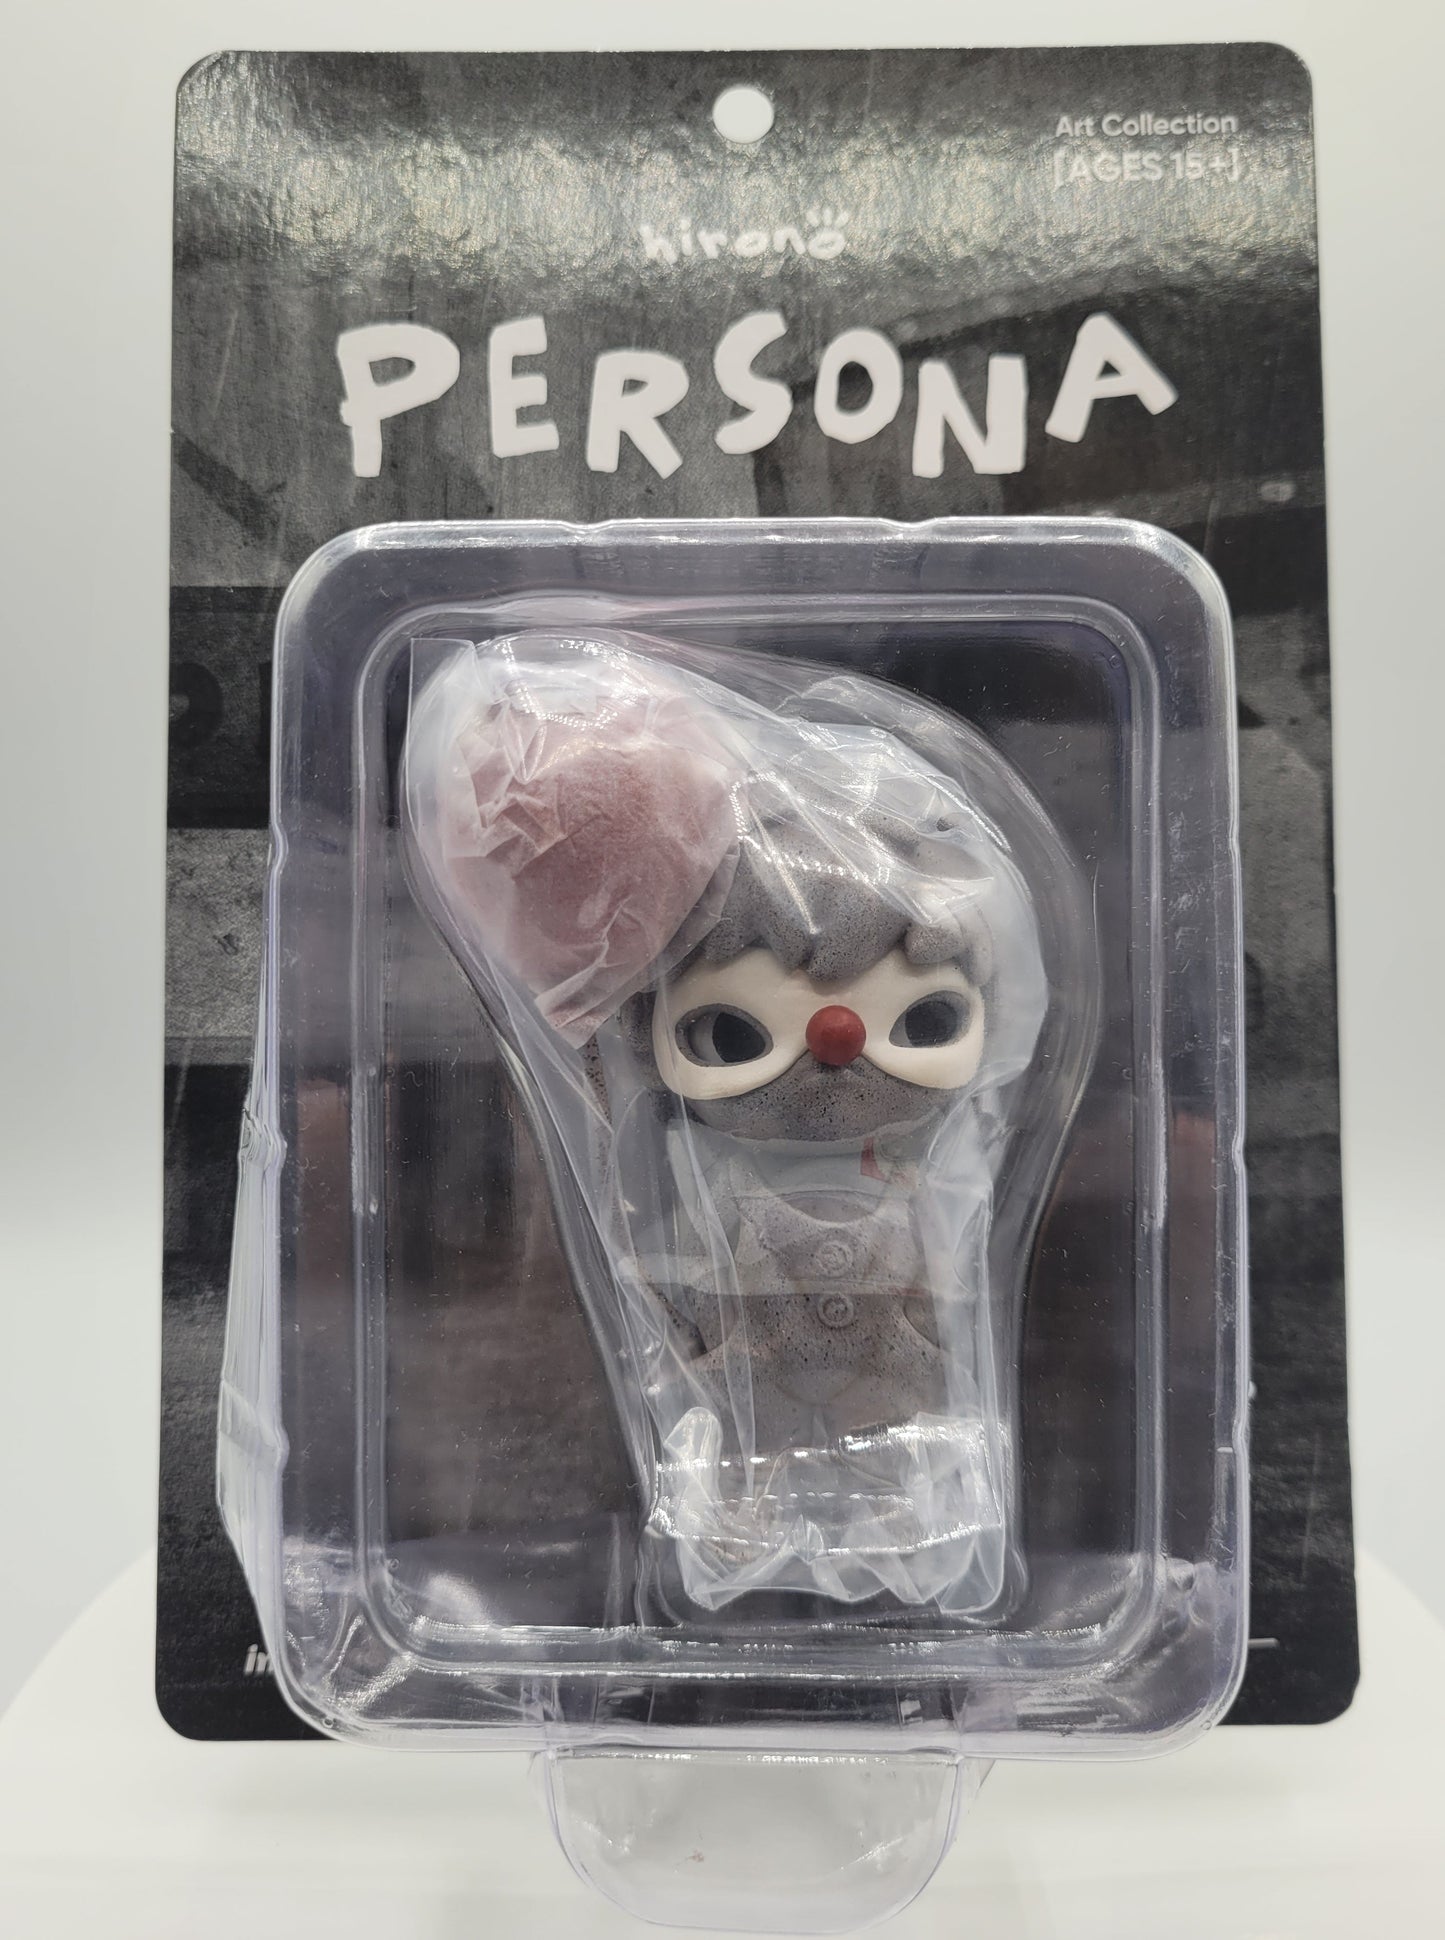 PopMart Inner Flow Hirono Lang Solo Art Exhibition Collectors Edition Persona